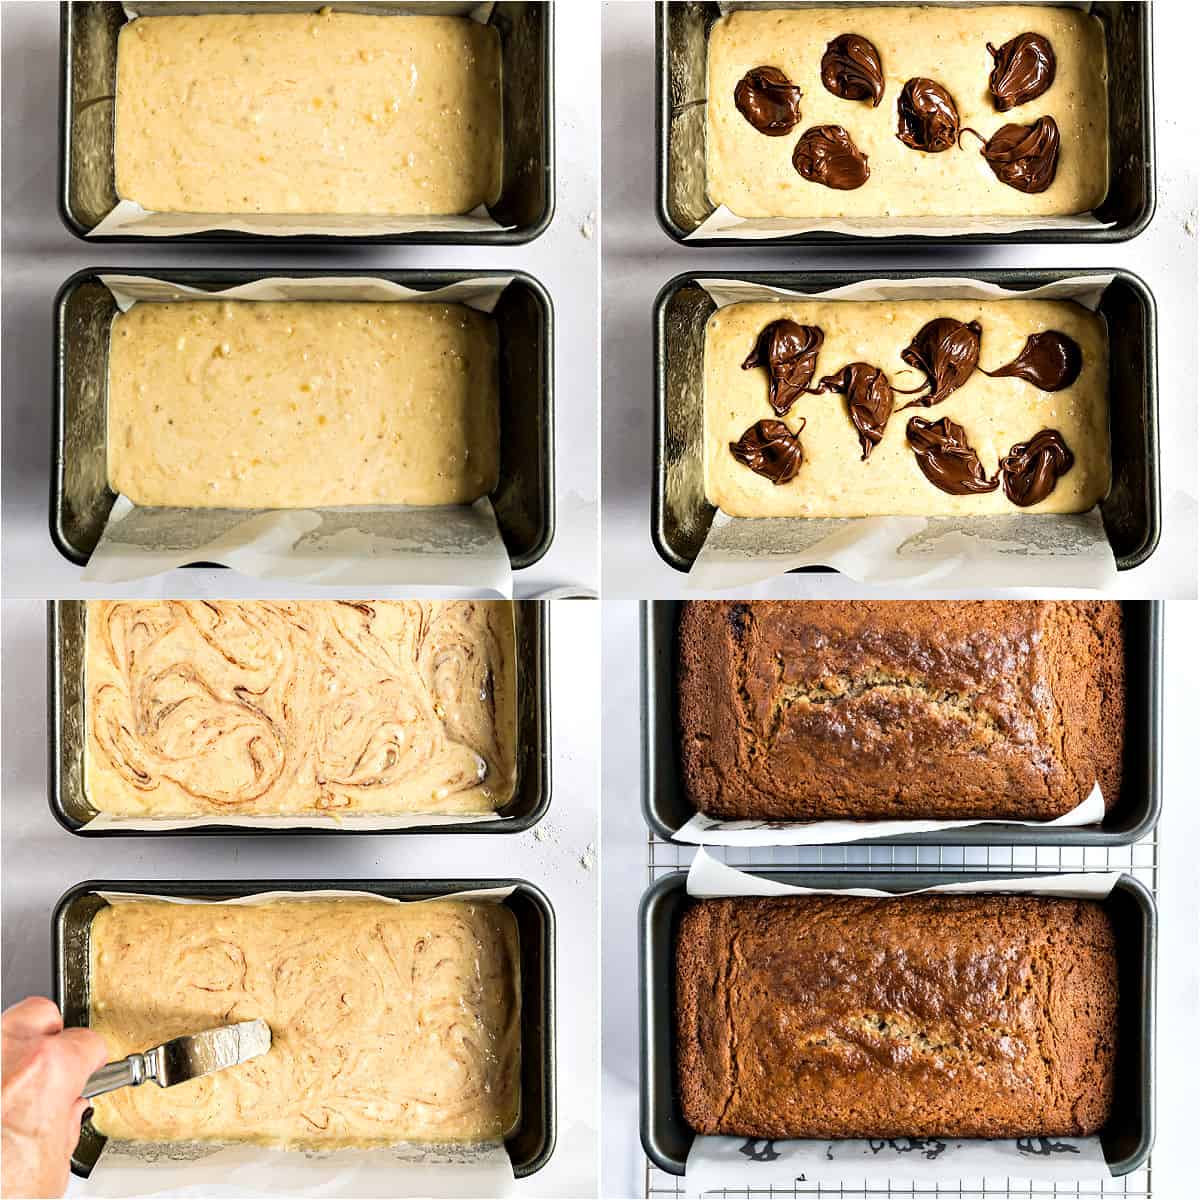 Step by step photos showing how to make nutella swirled banana bread.